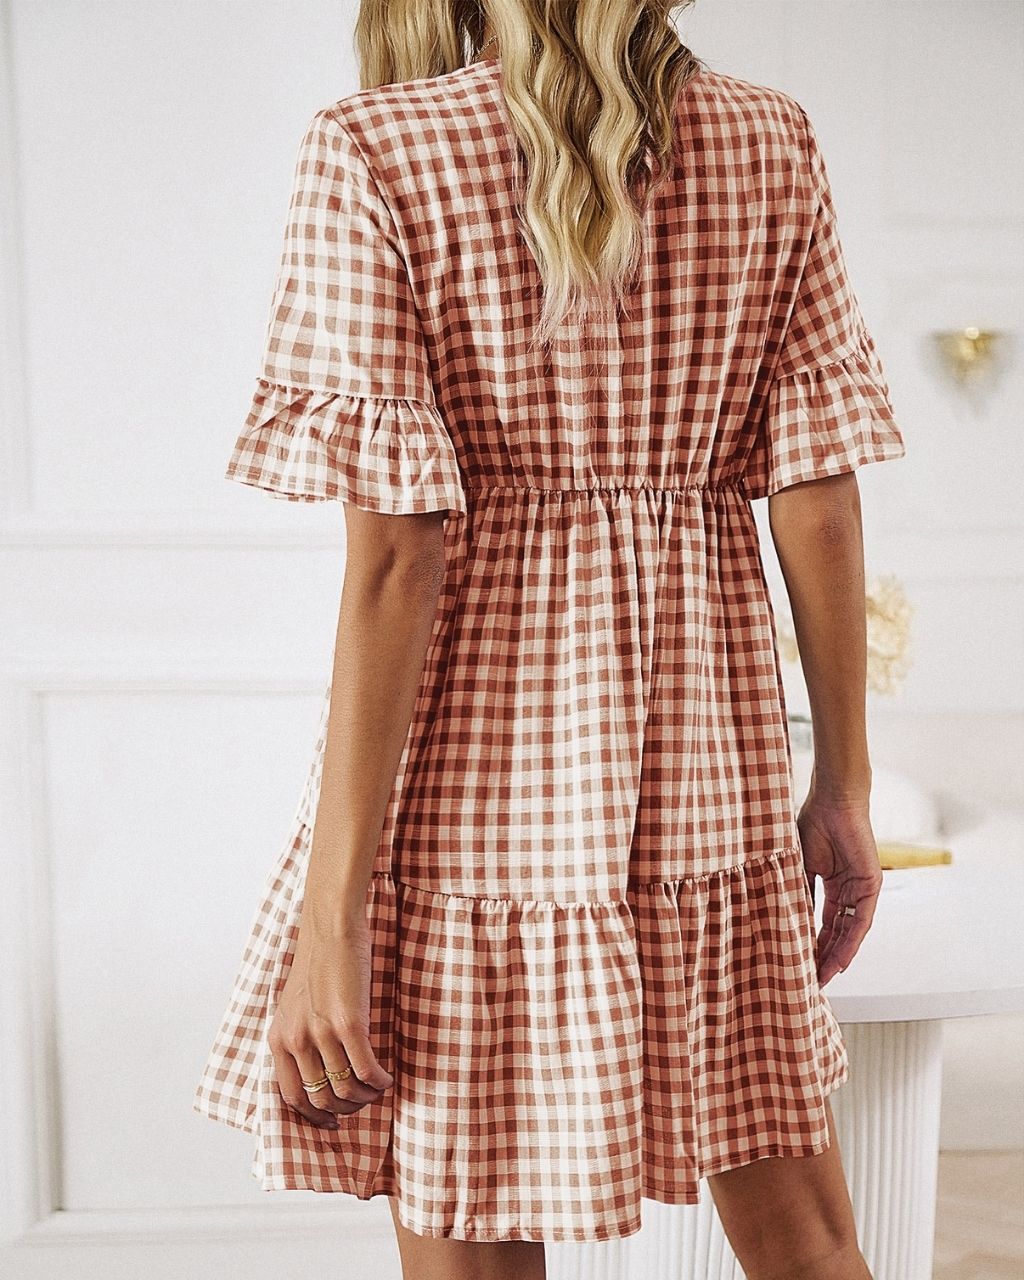 Get ready for an adventure in style with the Lucy Mini Gingham Dress! A fun rust color, and the all-over gingham print make it a must-have for your wardrobe. Not to mention the button detail, draw-up-string, tiered style and cap sleeves give it that extra special something! Ready, set, gingham style!